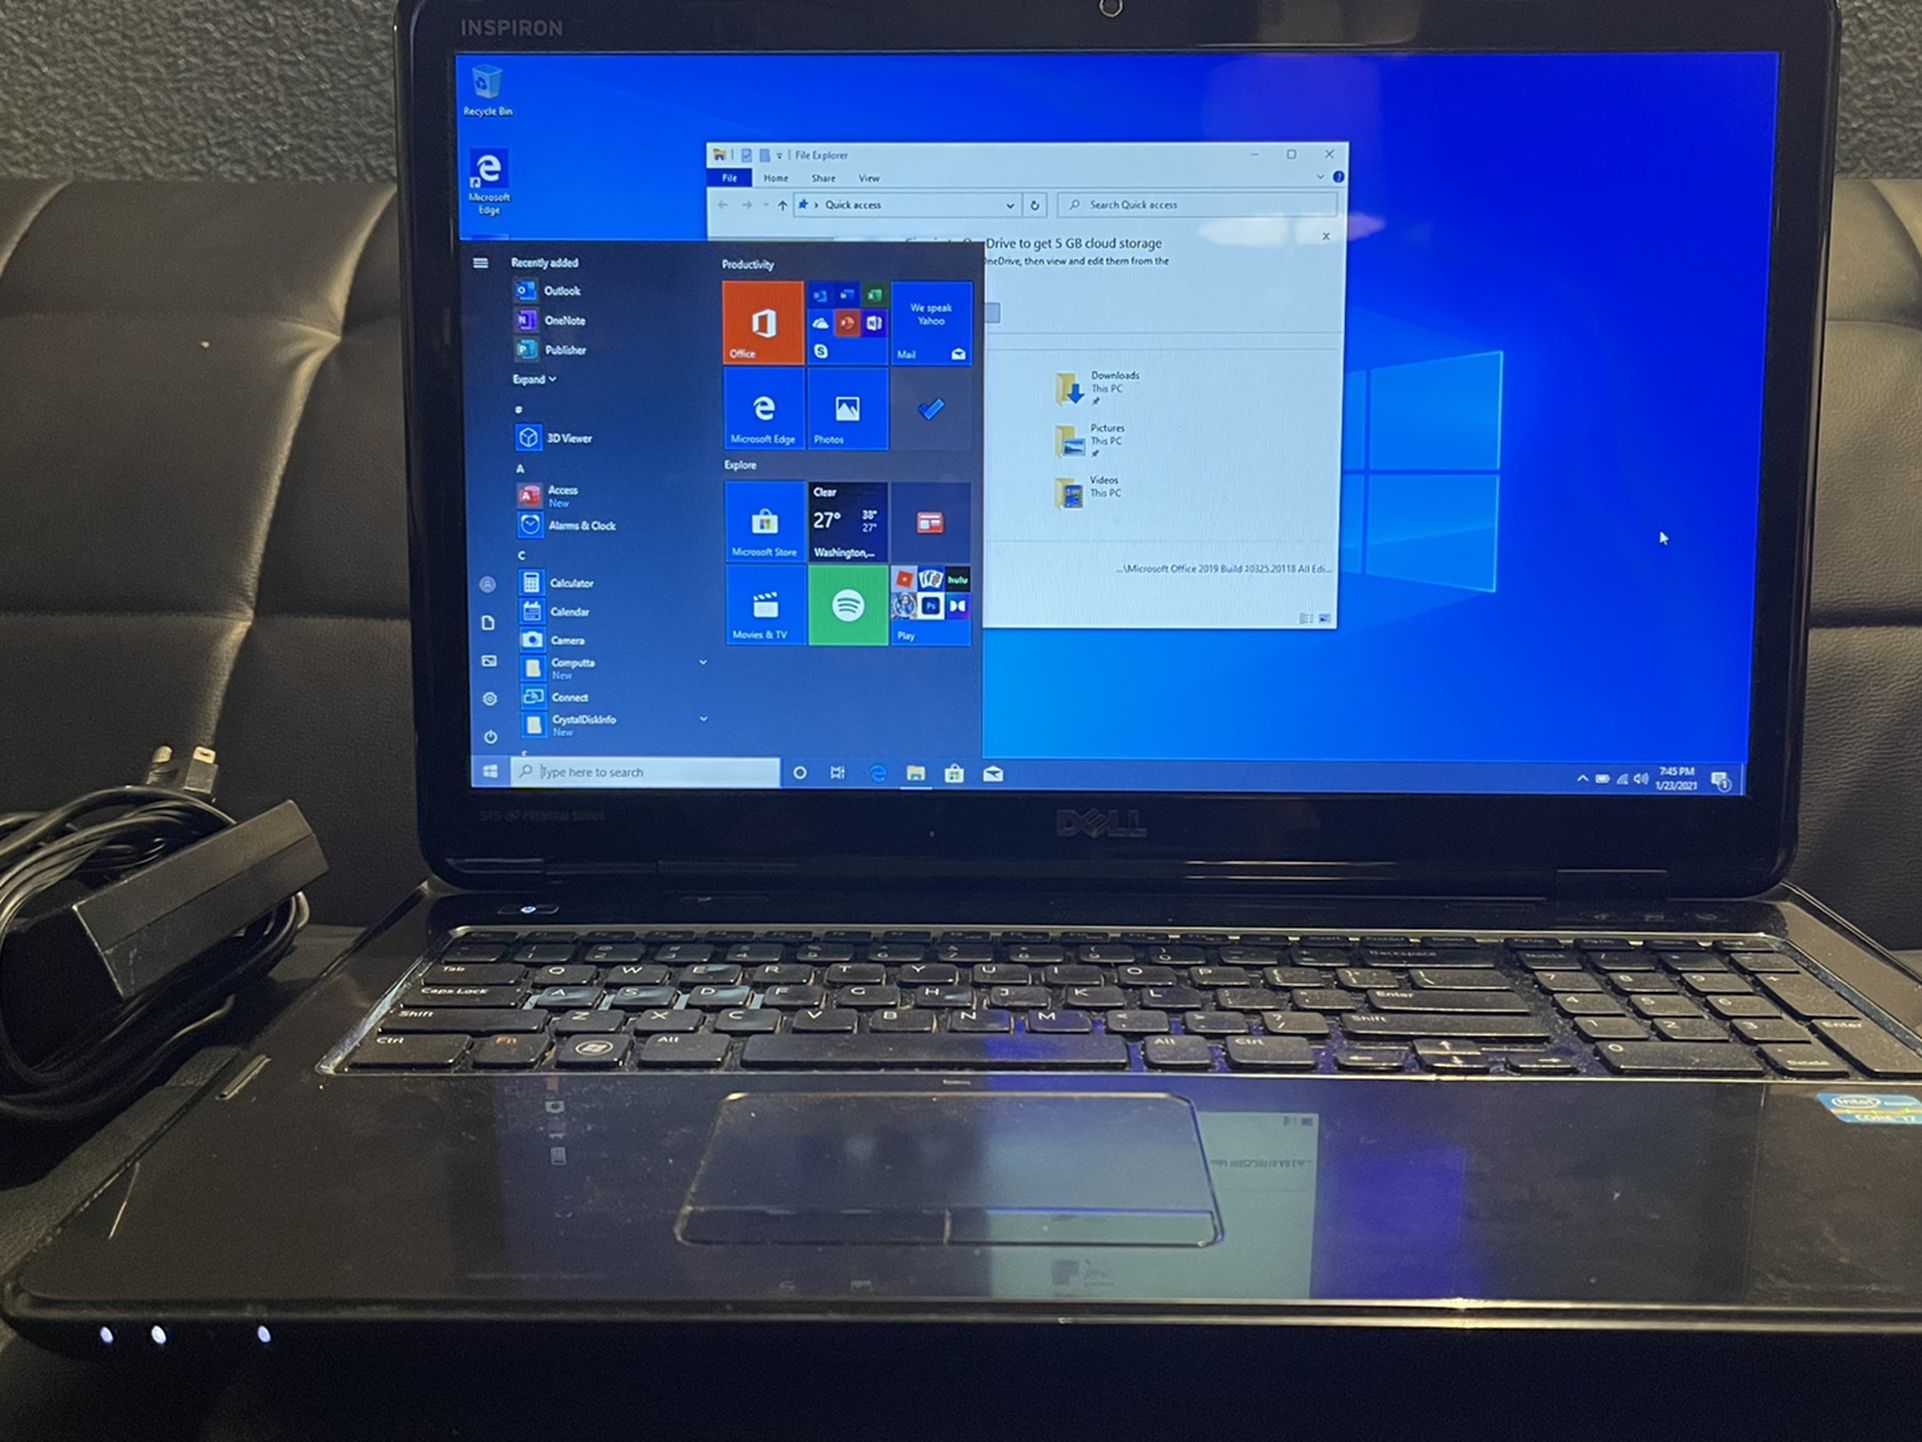 DELL INSPIRON 17 INTEL i7 LAPTOP WINDOWS 10 COMES W/CHARGER TRADES OBO